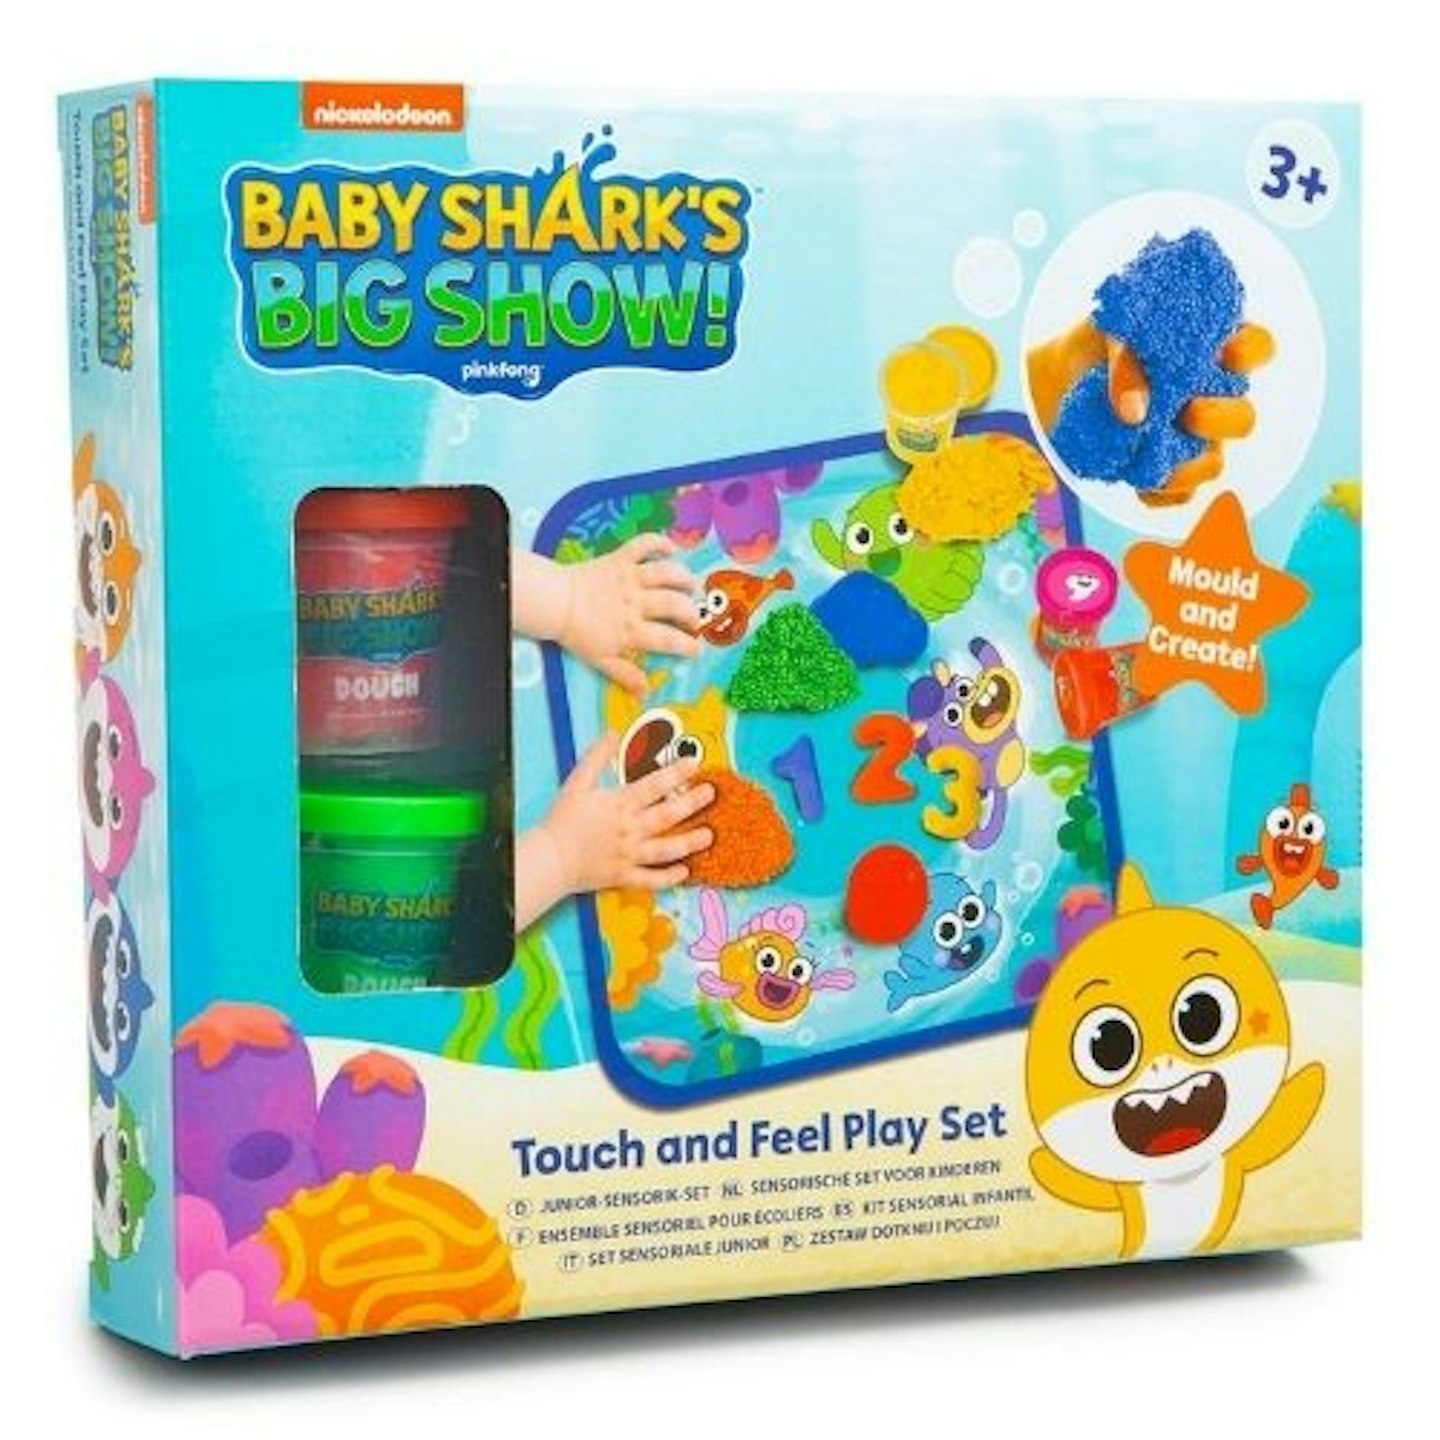 Touch and Feel Playset